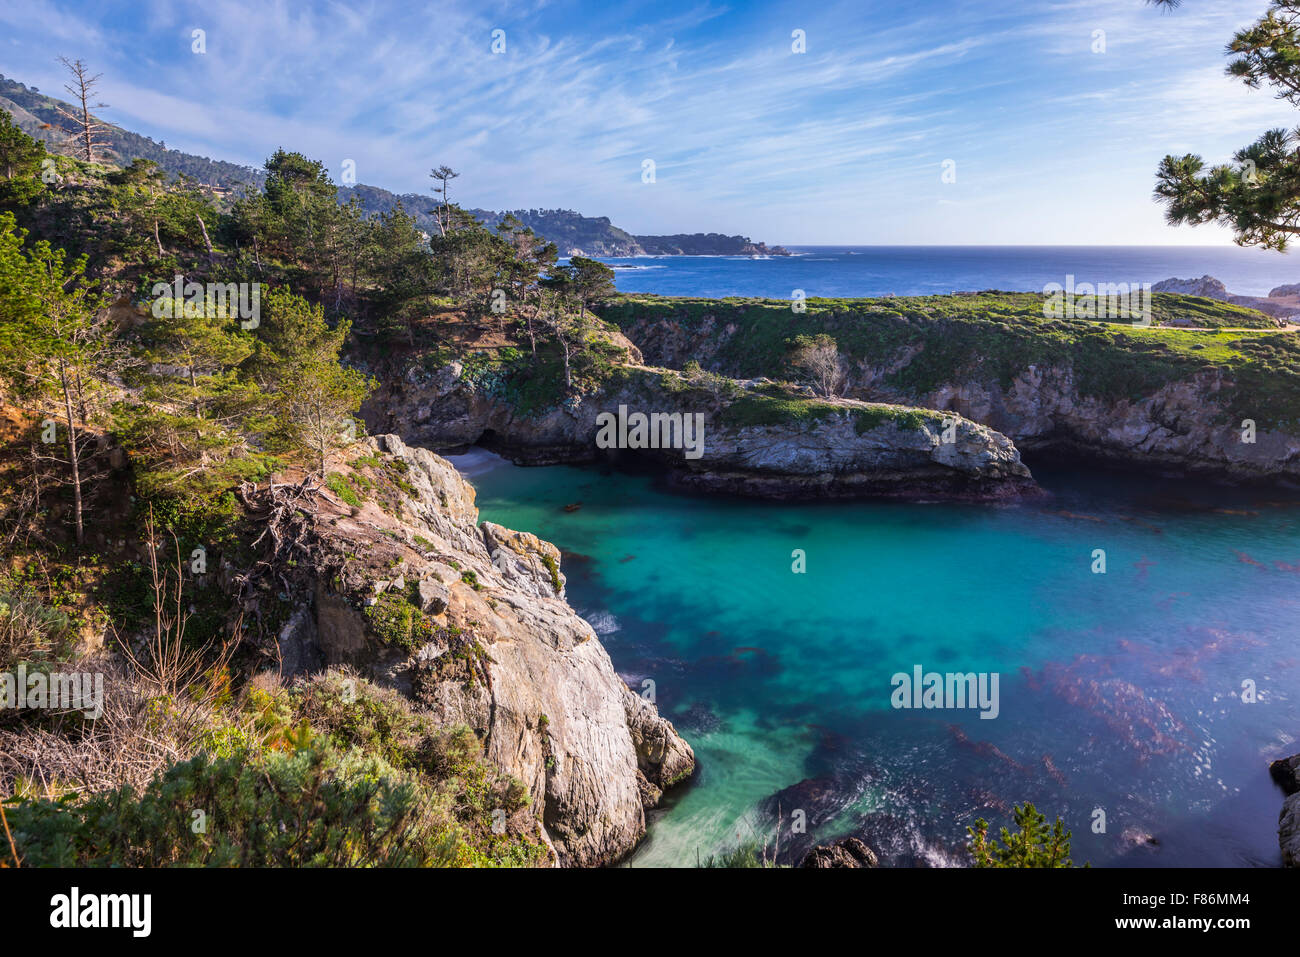 China Cove and rocky coastline. Point Lobos State Natural Reserve, Carmel, California, United States. Stock Photo